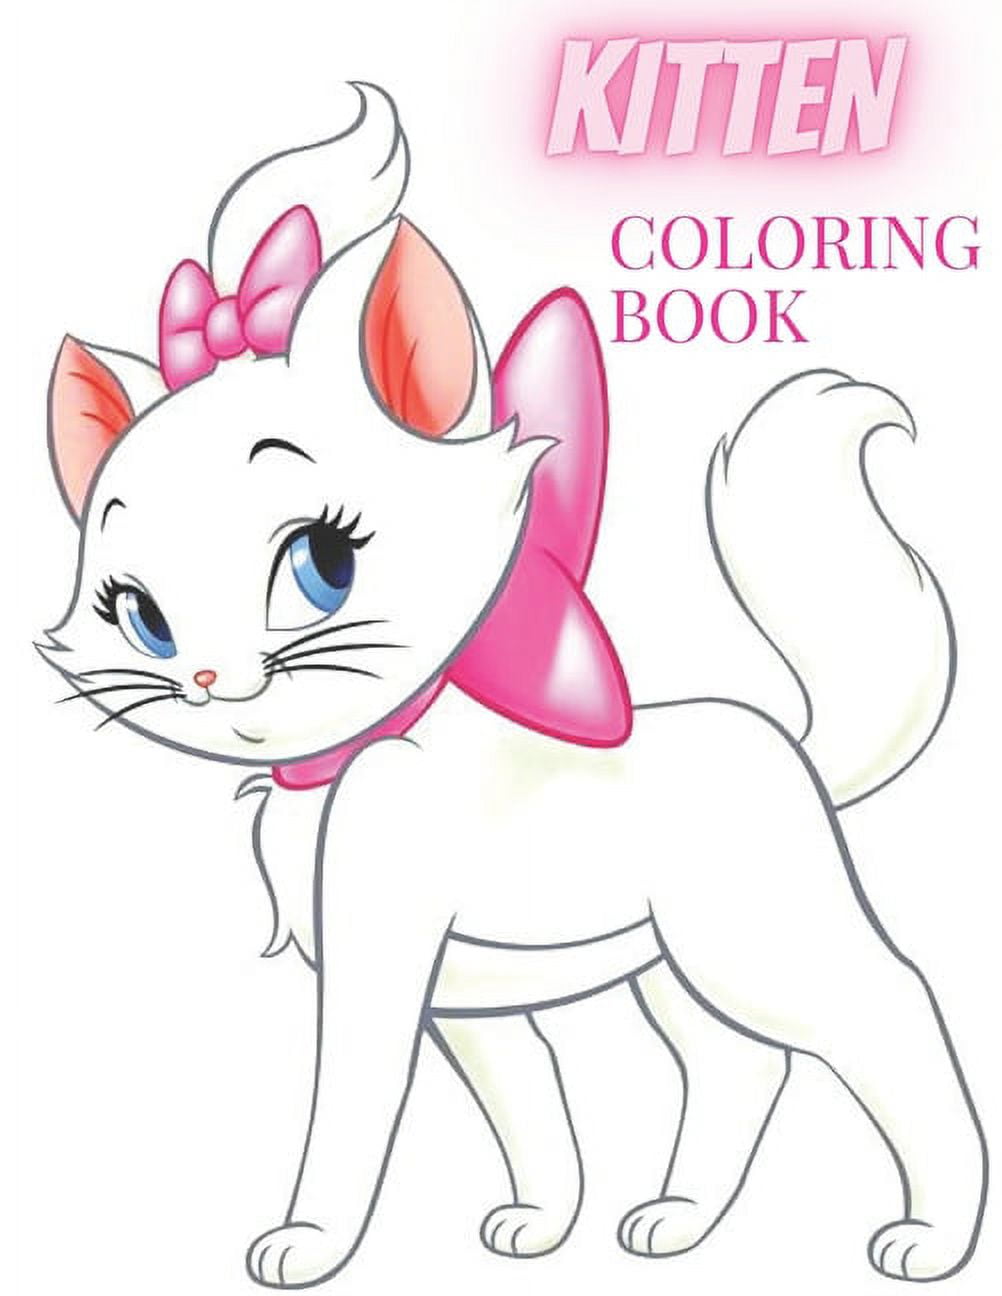 Kitten coloring book kitten coloring book coloring pages in total on single side pages with a variety of kitten movie characters and scenes paperback